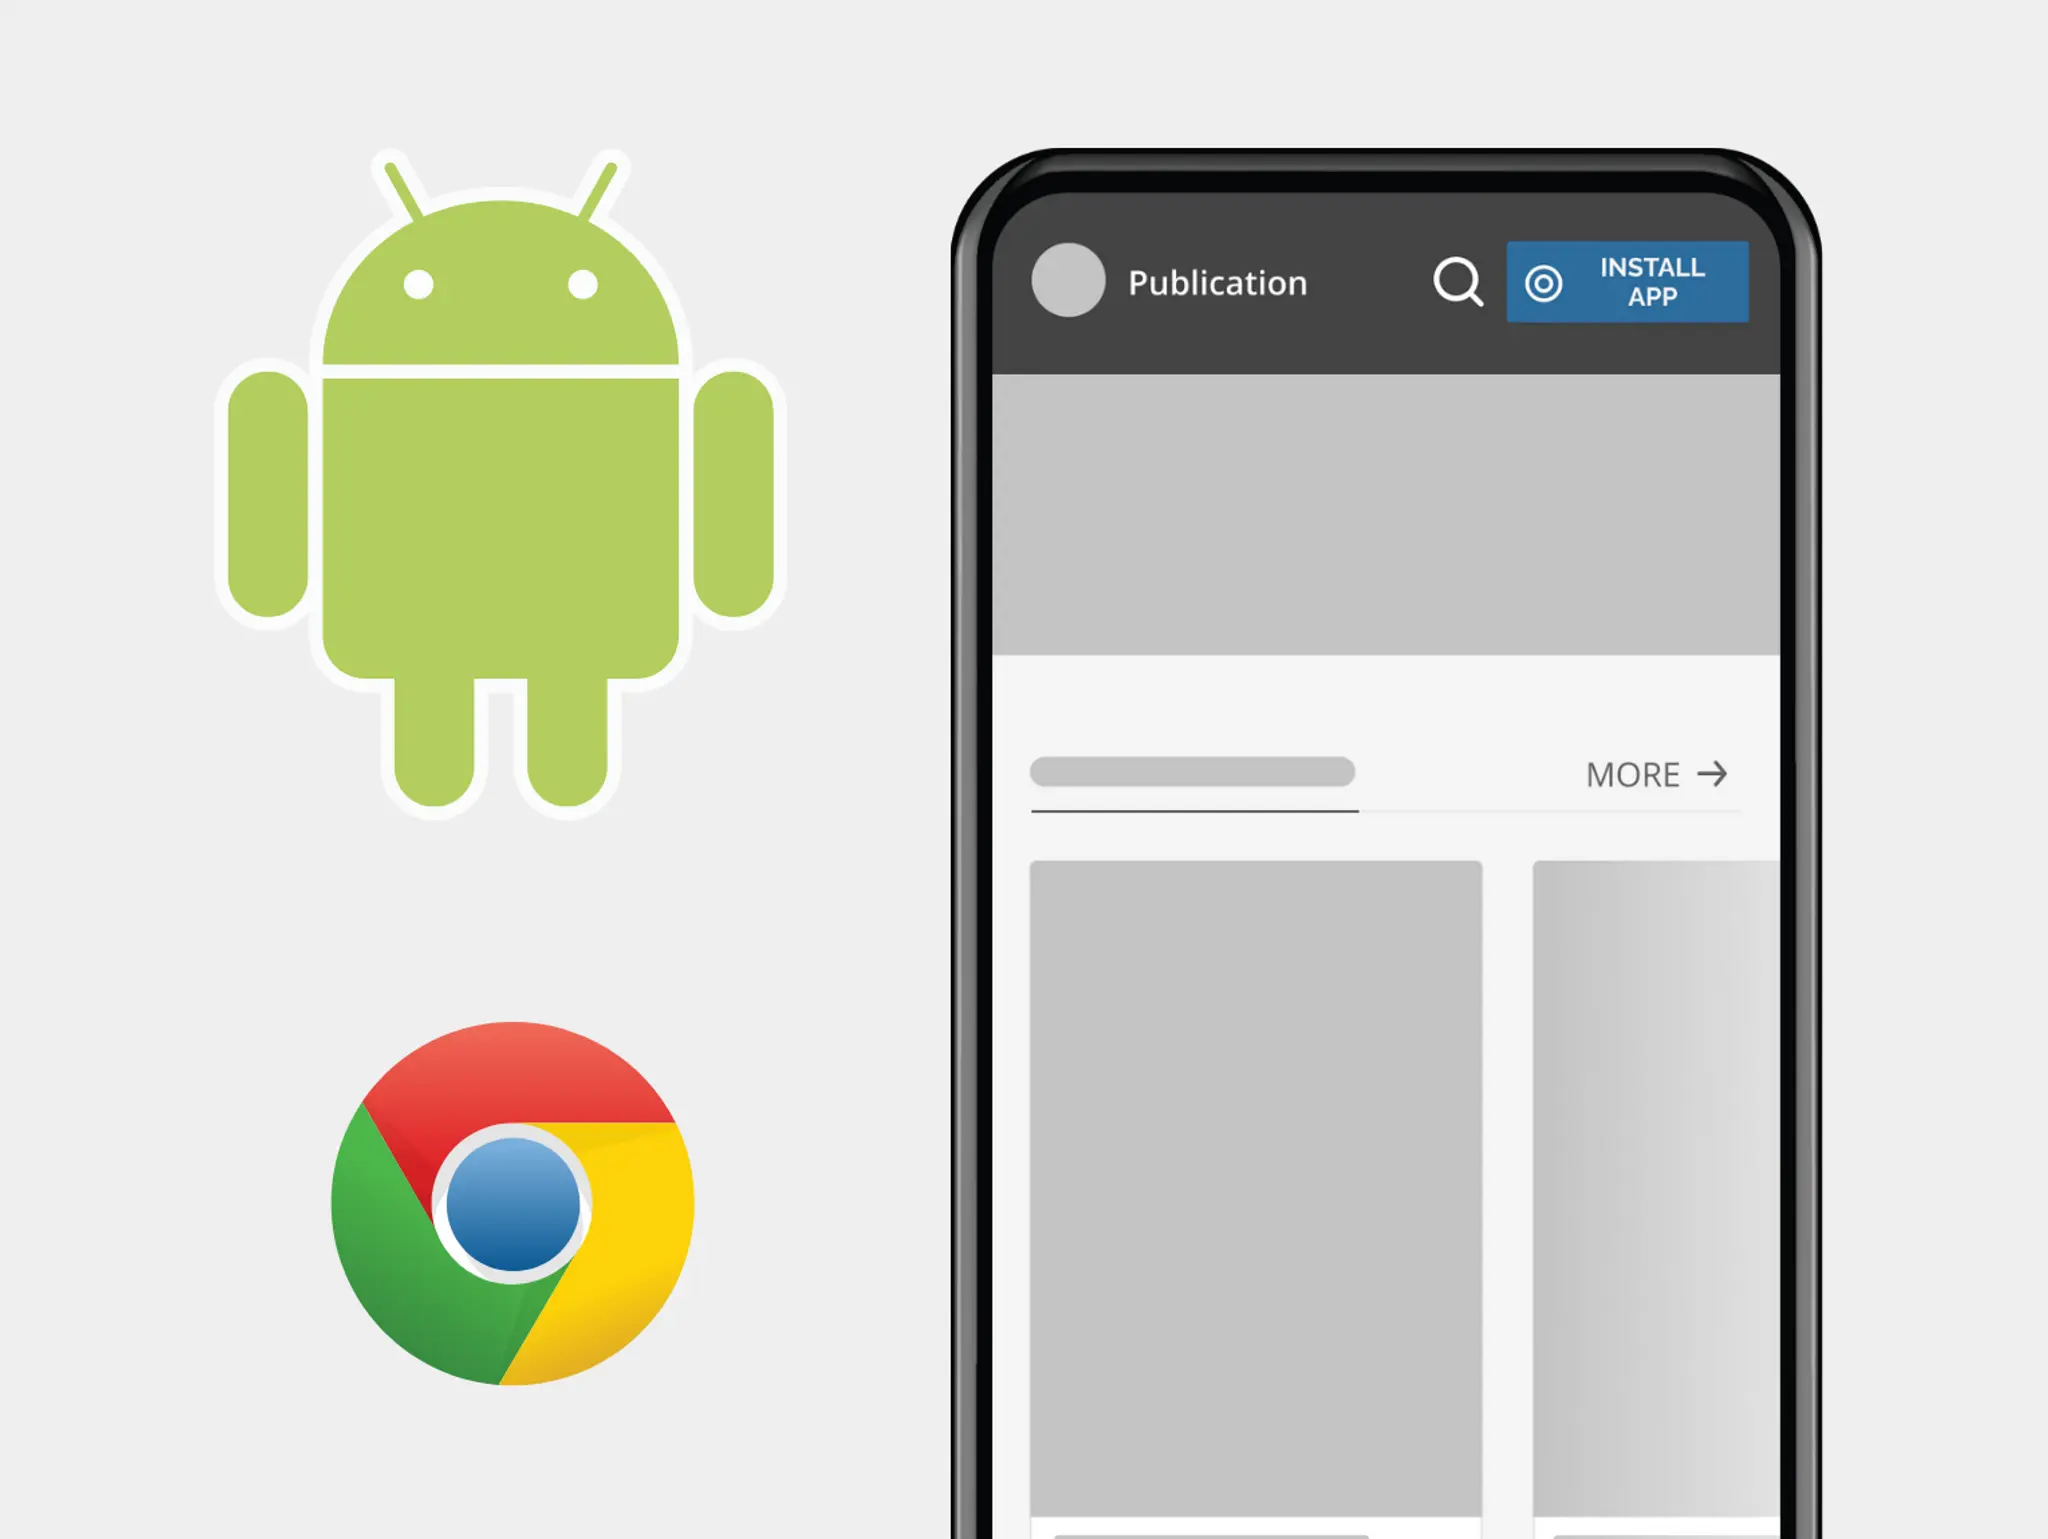 How to Install This App on Android with Google Chrome